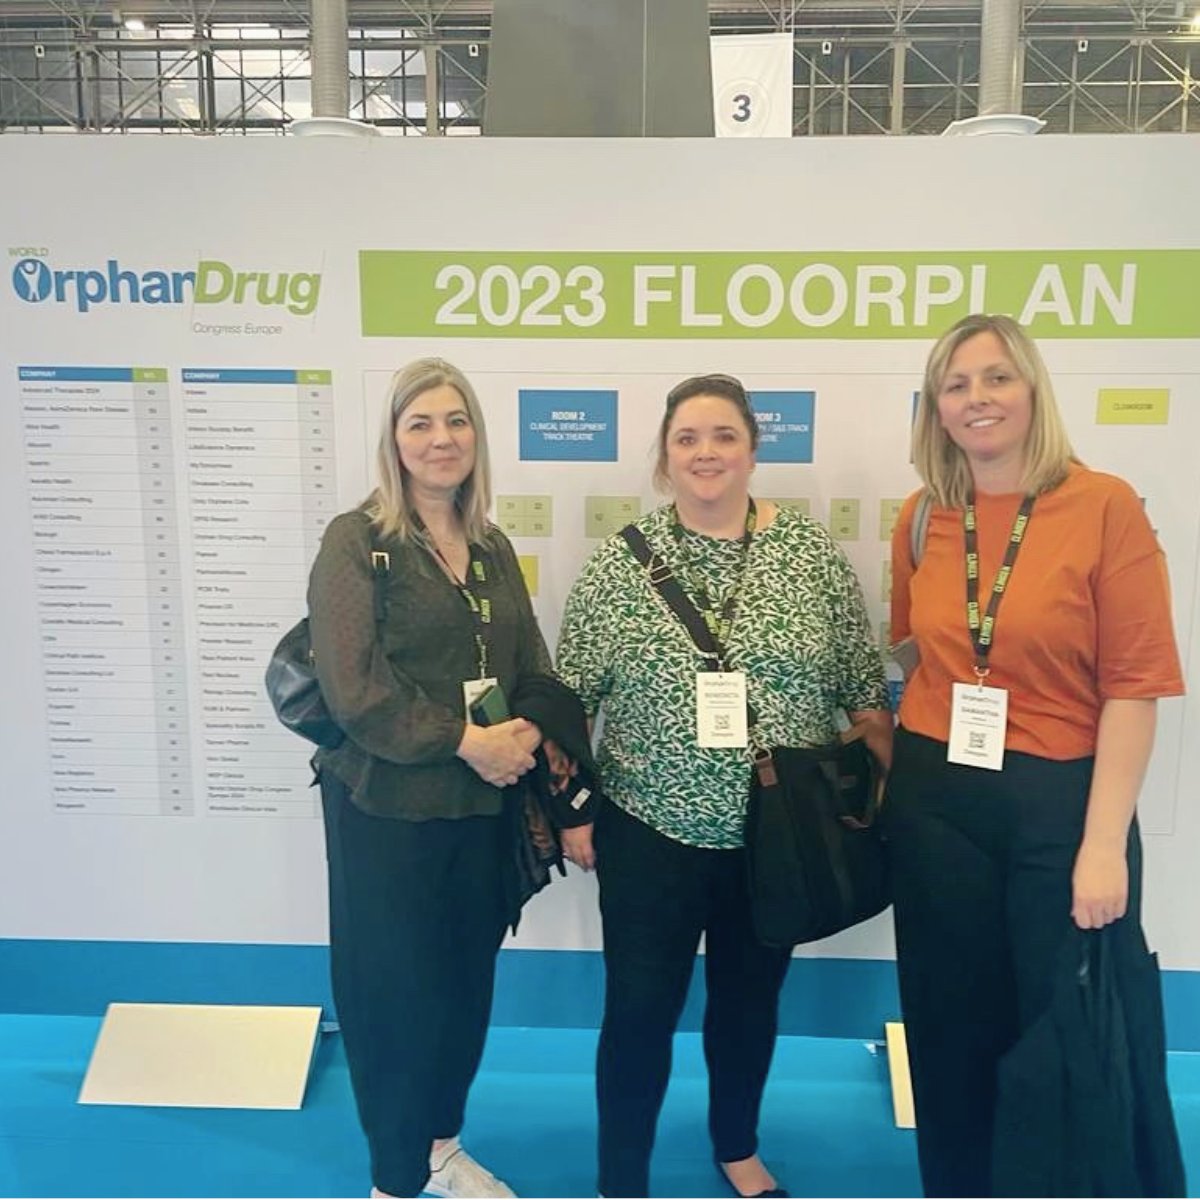 It’s day 2 of the #orphandrugcongress where Alex Morrison, Benedicta Marshall-Andrew, and Samantha Wiseman, are using this invaluable opportunity to discuss, network and gain insights into innovative ideas in the fields of #orphandrugs and #rarediseases. #research #clinicaltrials